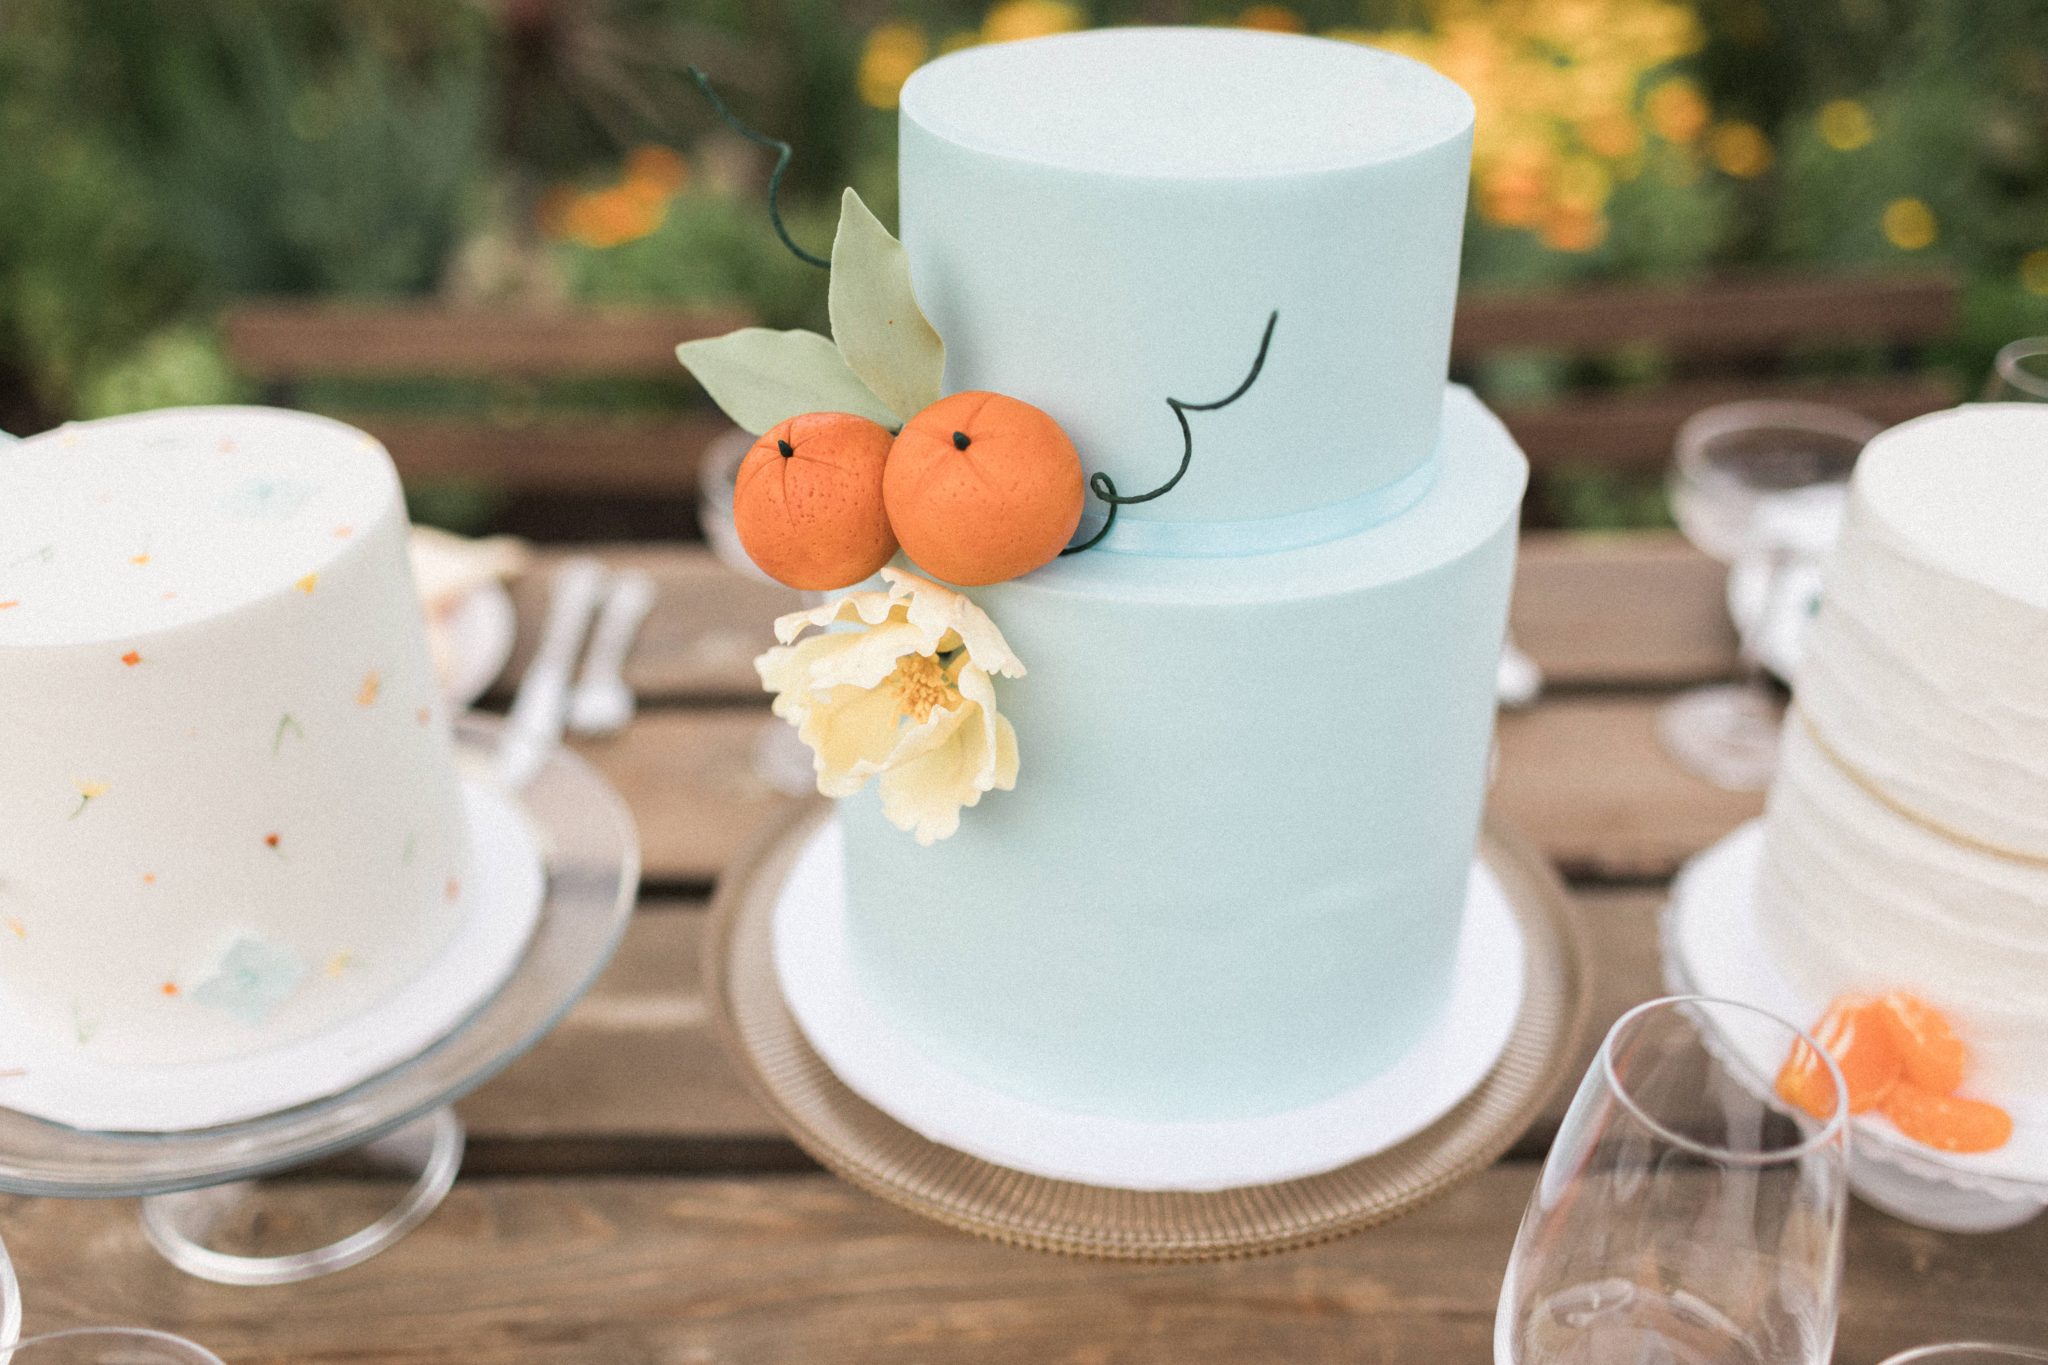 Garden inspired wedding with a robin blue wedding cake and tangerine accents